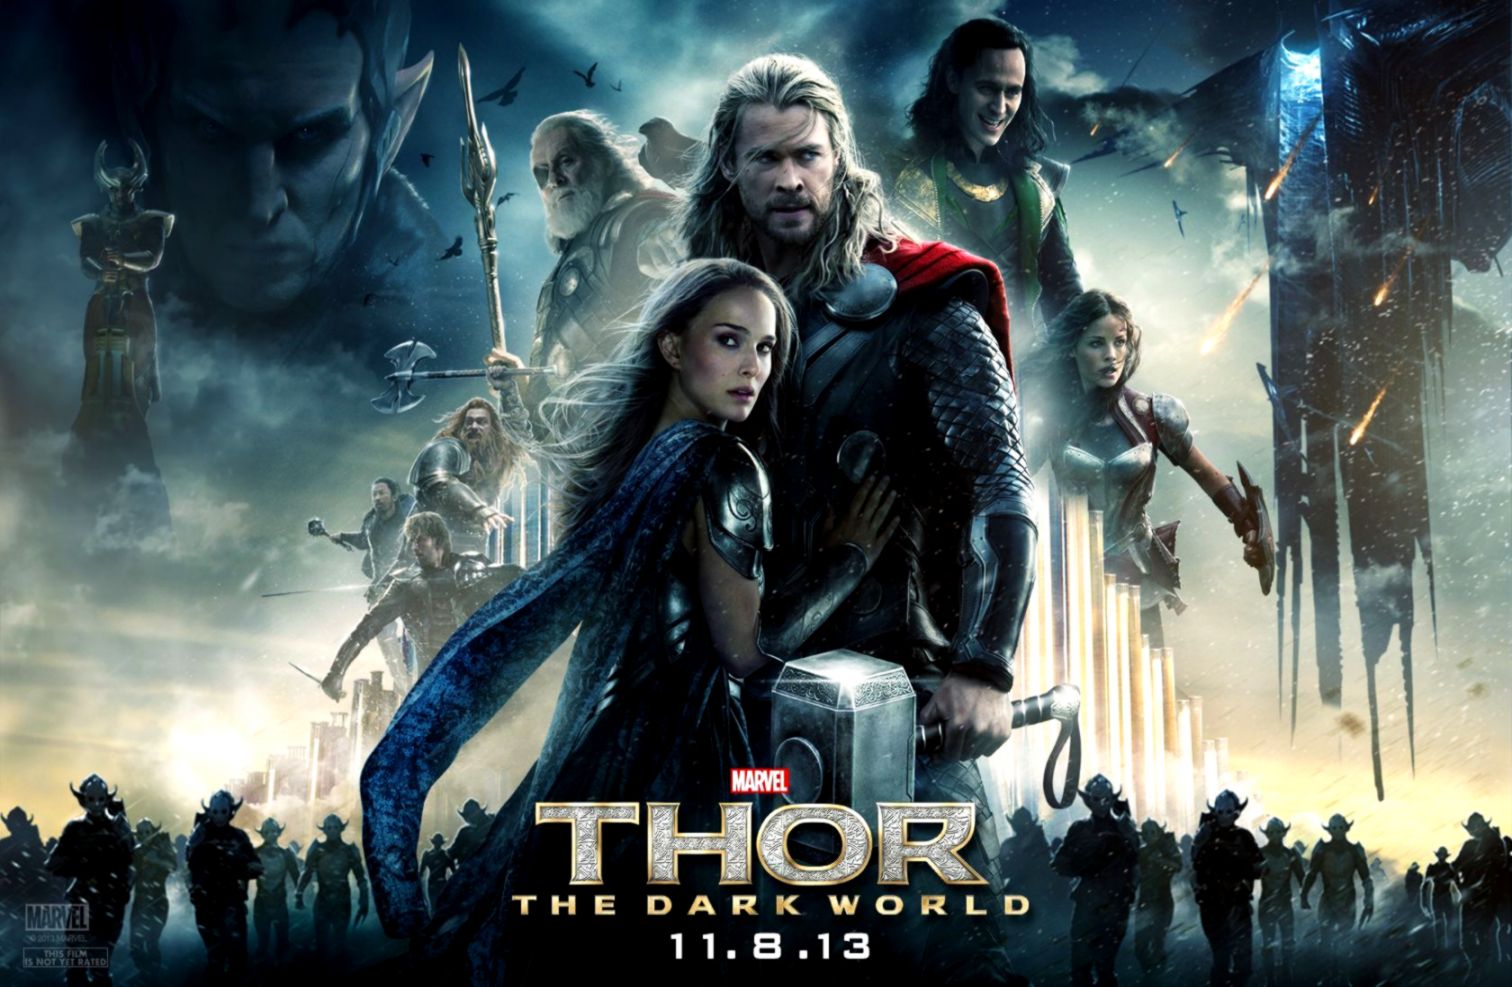 The Dark World 2013 Thor 2 Hd Wallpaper Wallpapers Moving